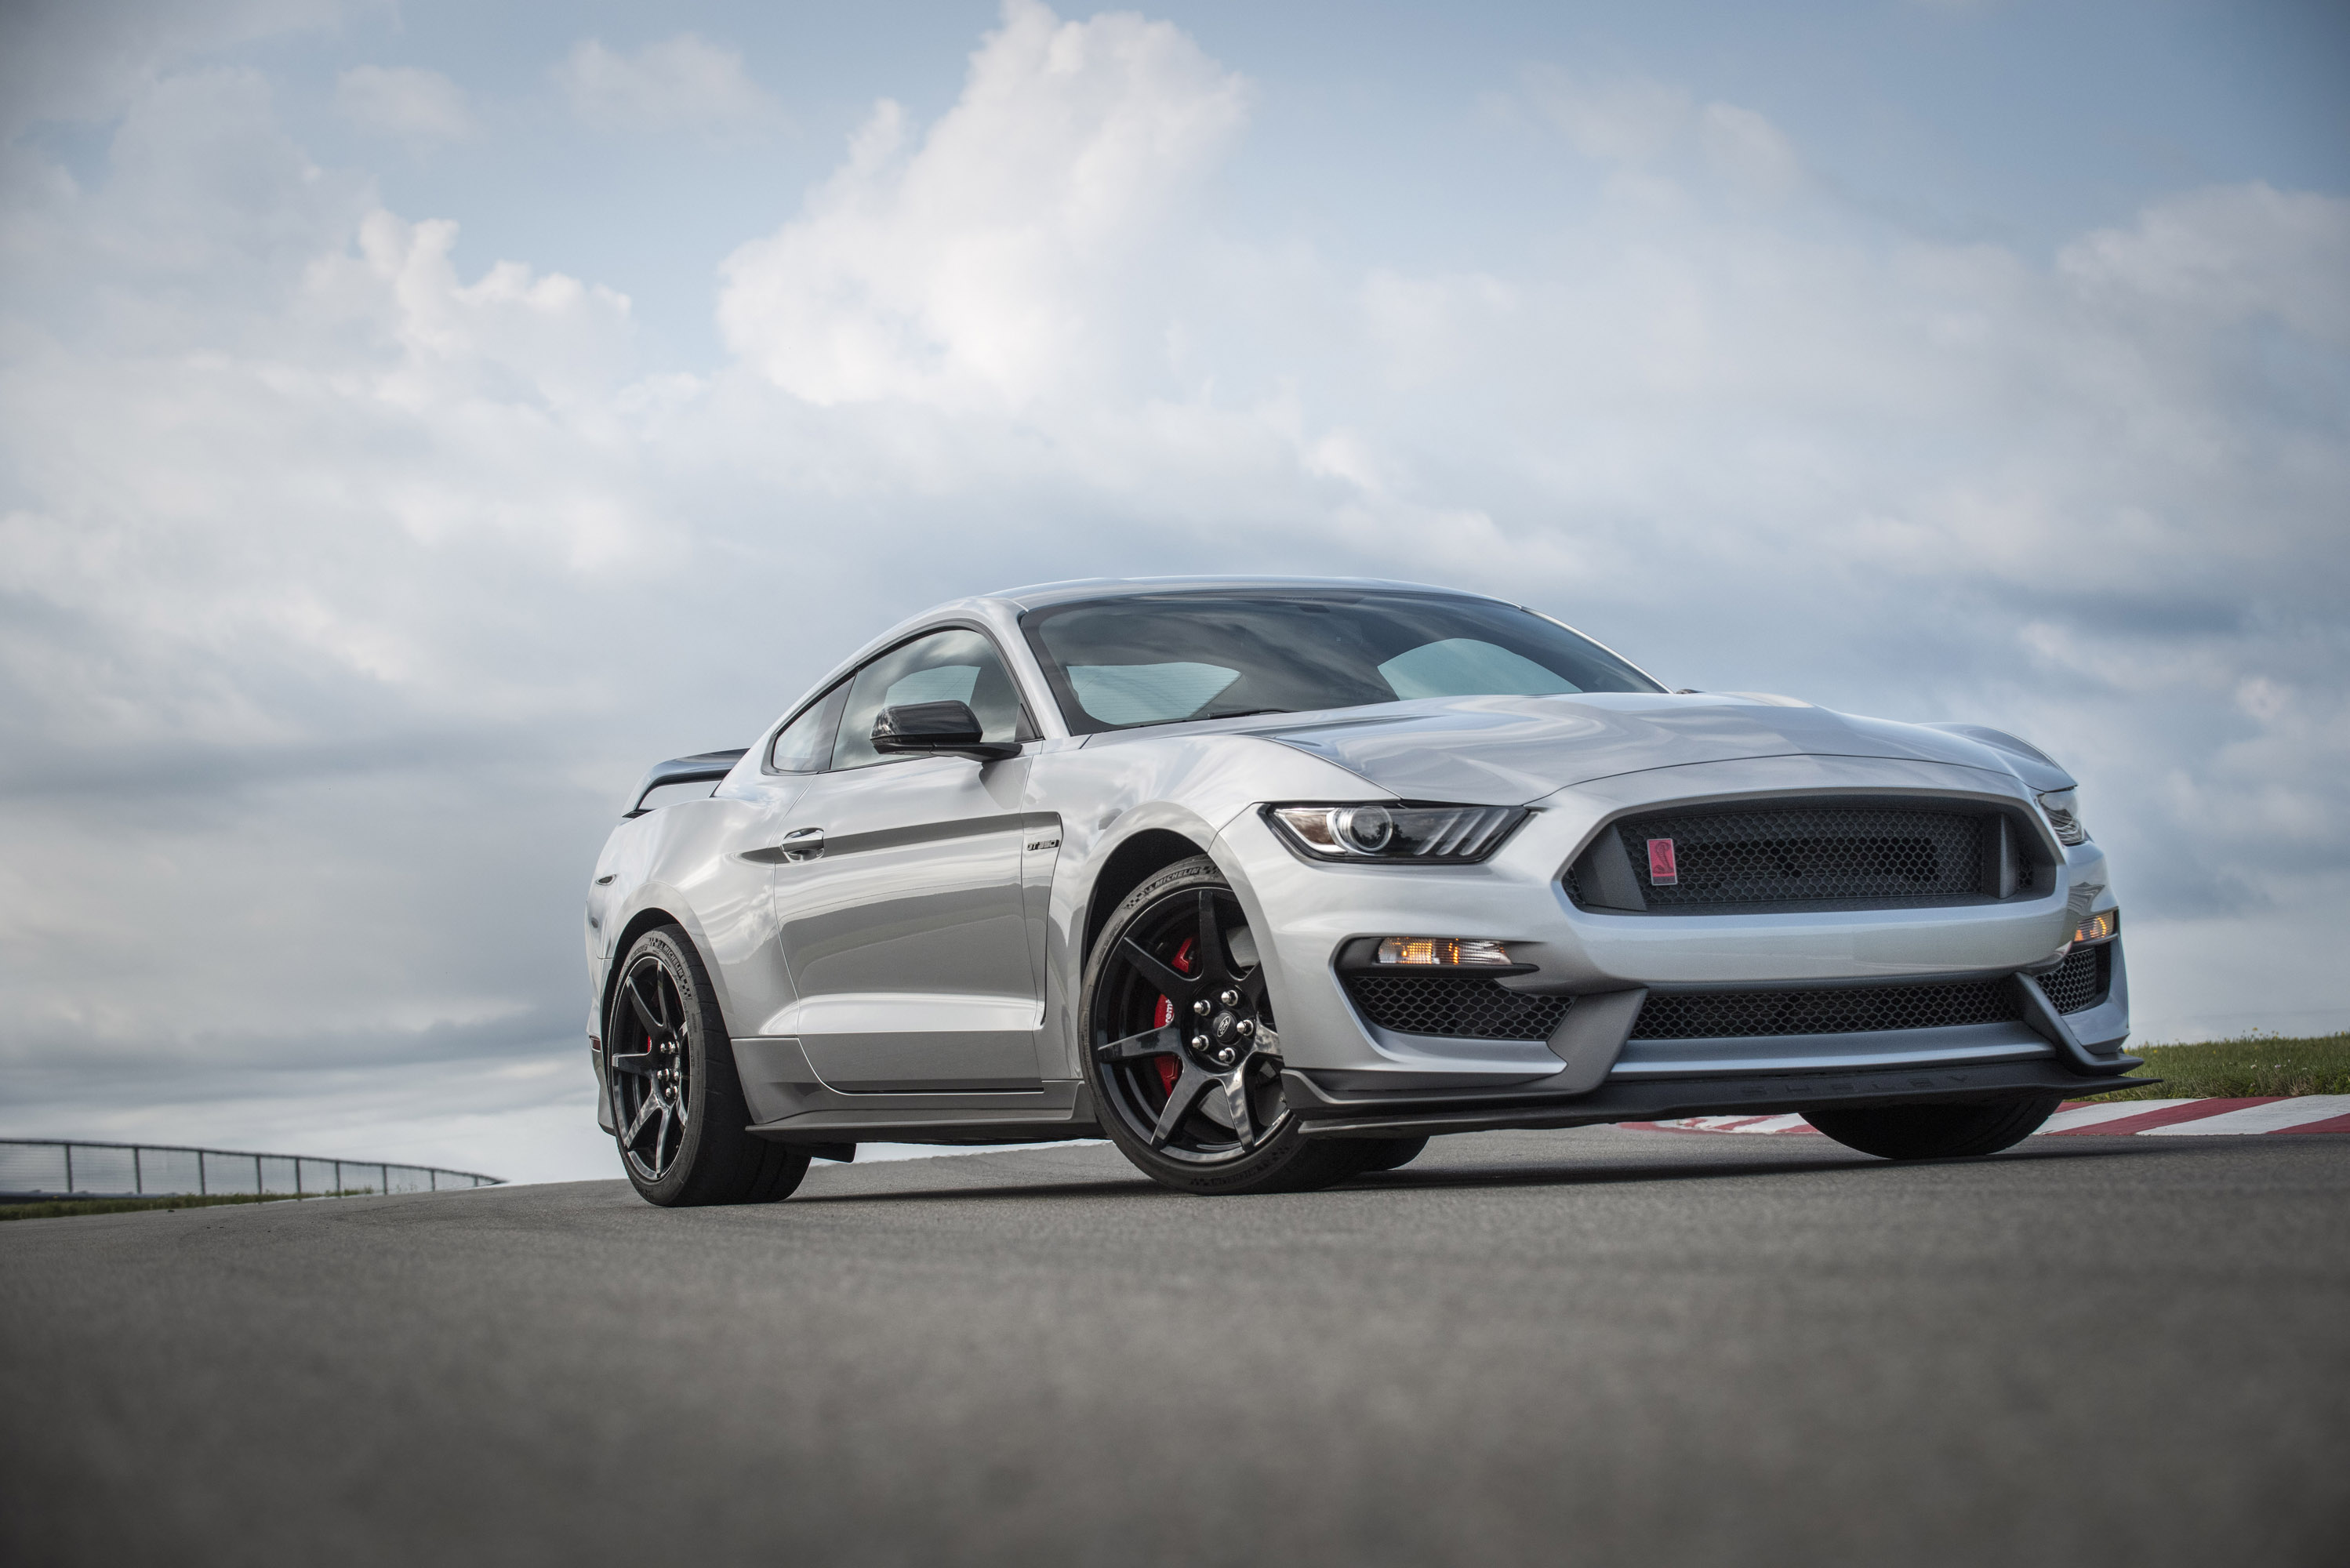 New Mustang Shelby comes with tons of upgrades and new 